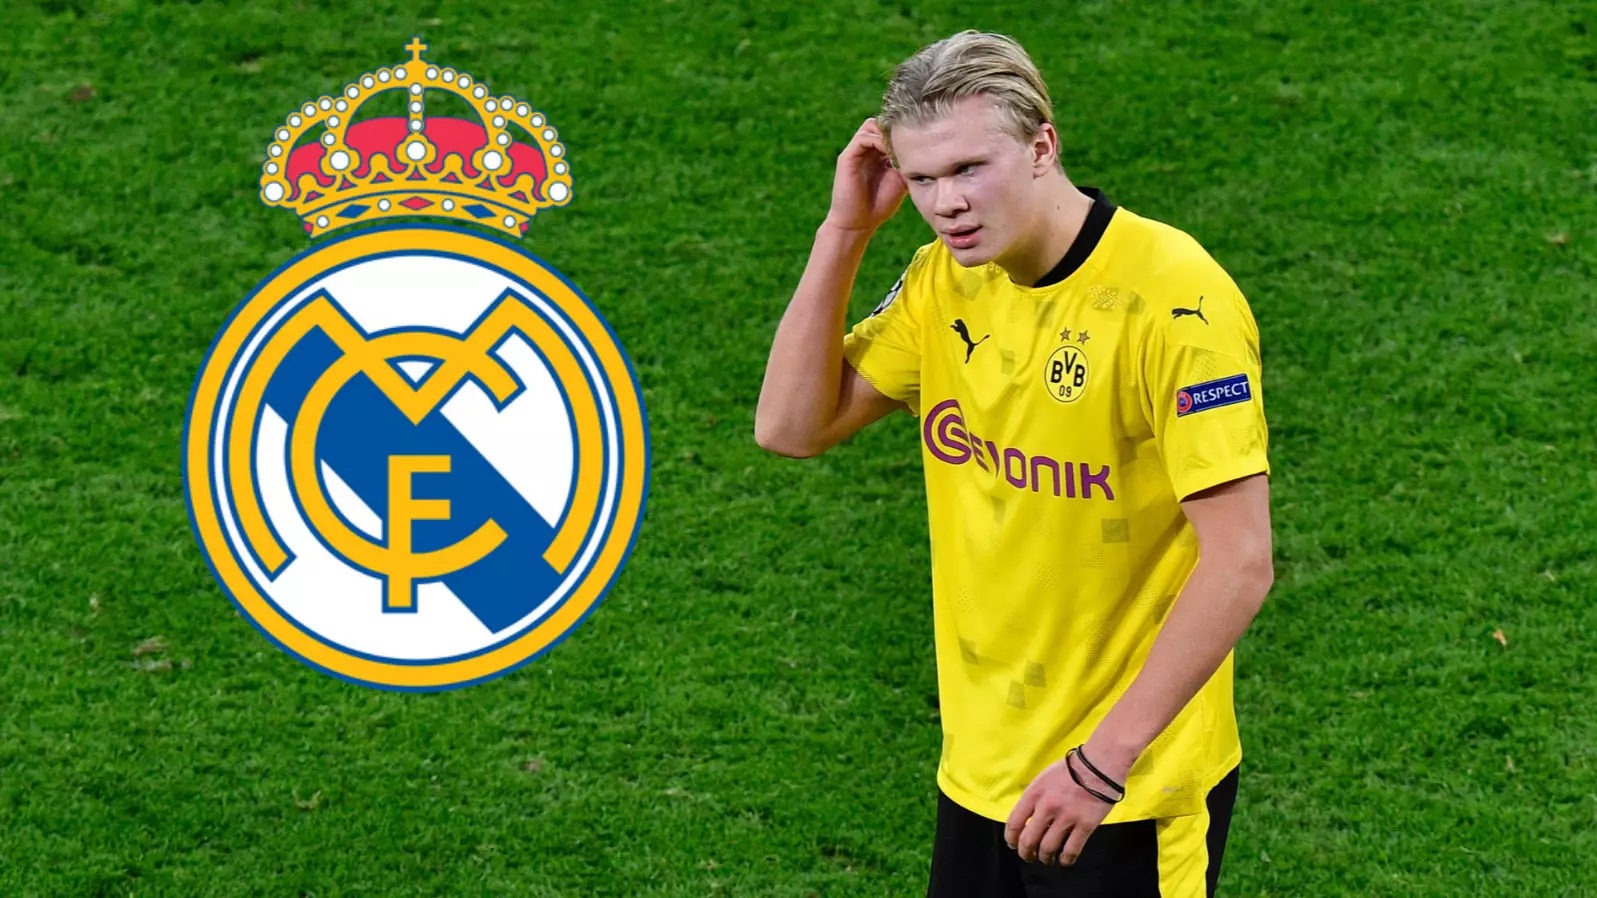 Erling Haaland Has 'Verbal Agreement' To Leave Borussia Dortmund In 2022, Real Madrid 'Optimistic'